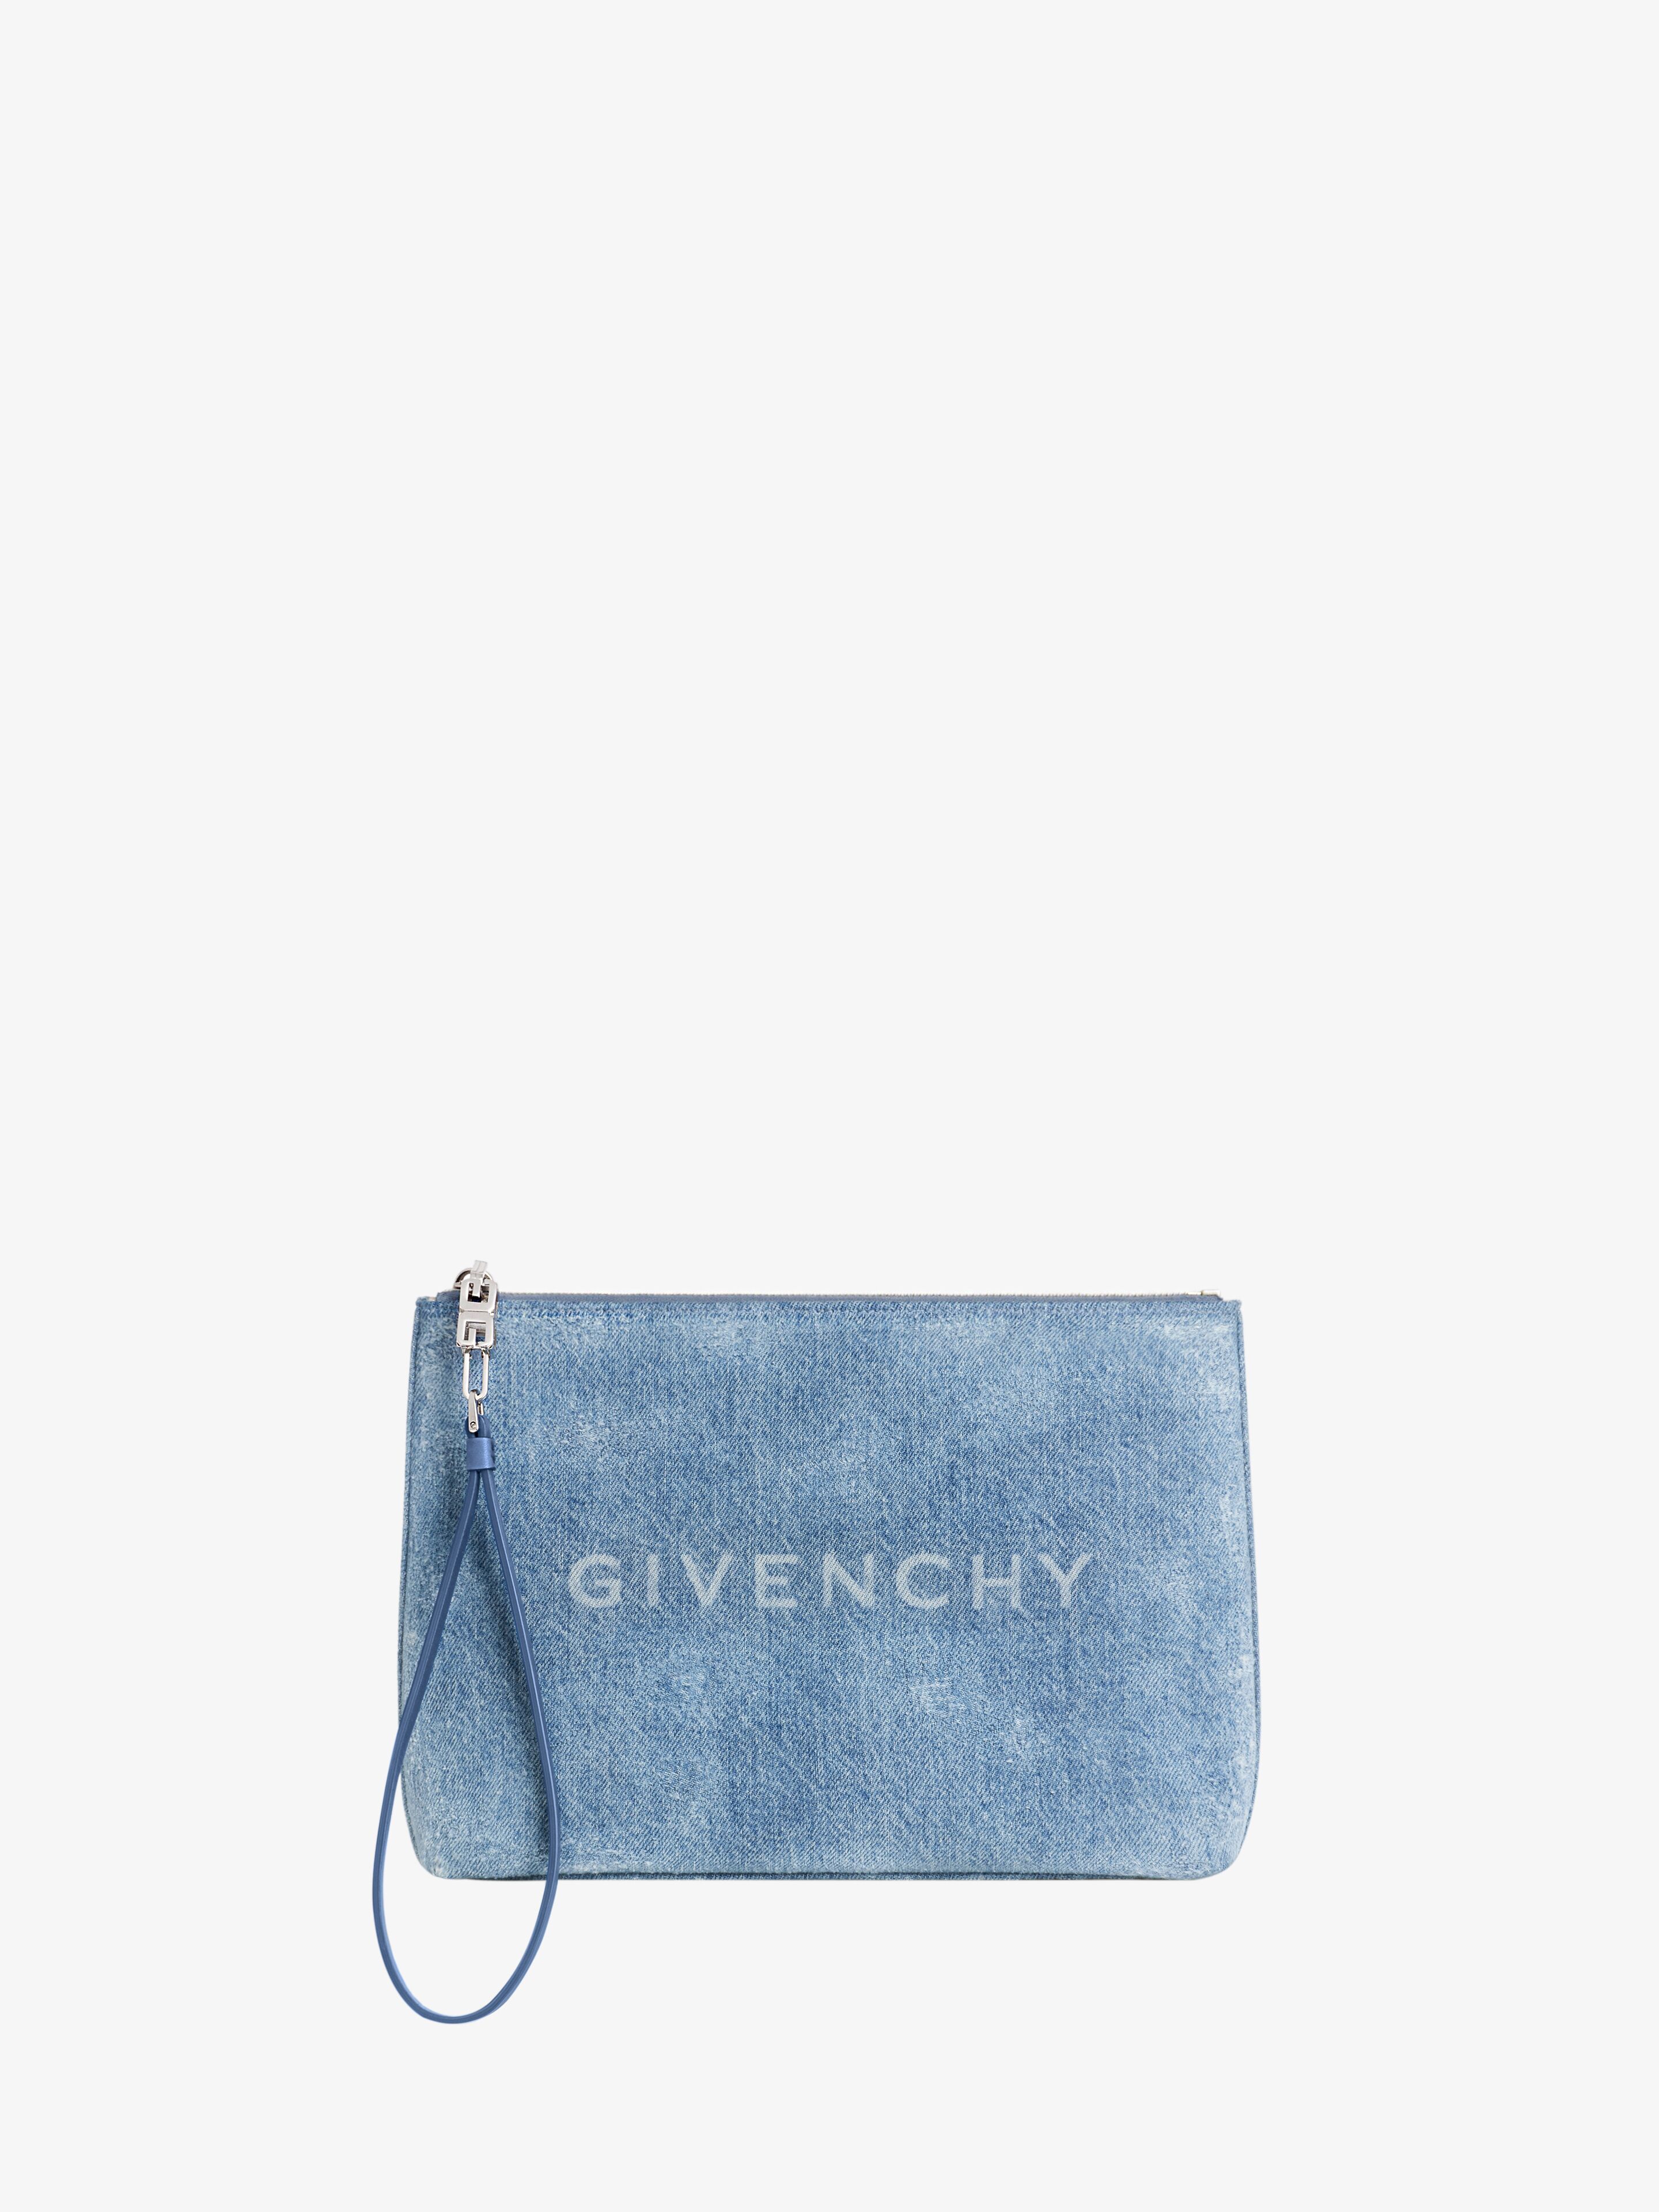 Givenchy Travel Pouch In Denim In Multicolor